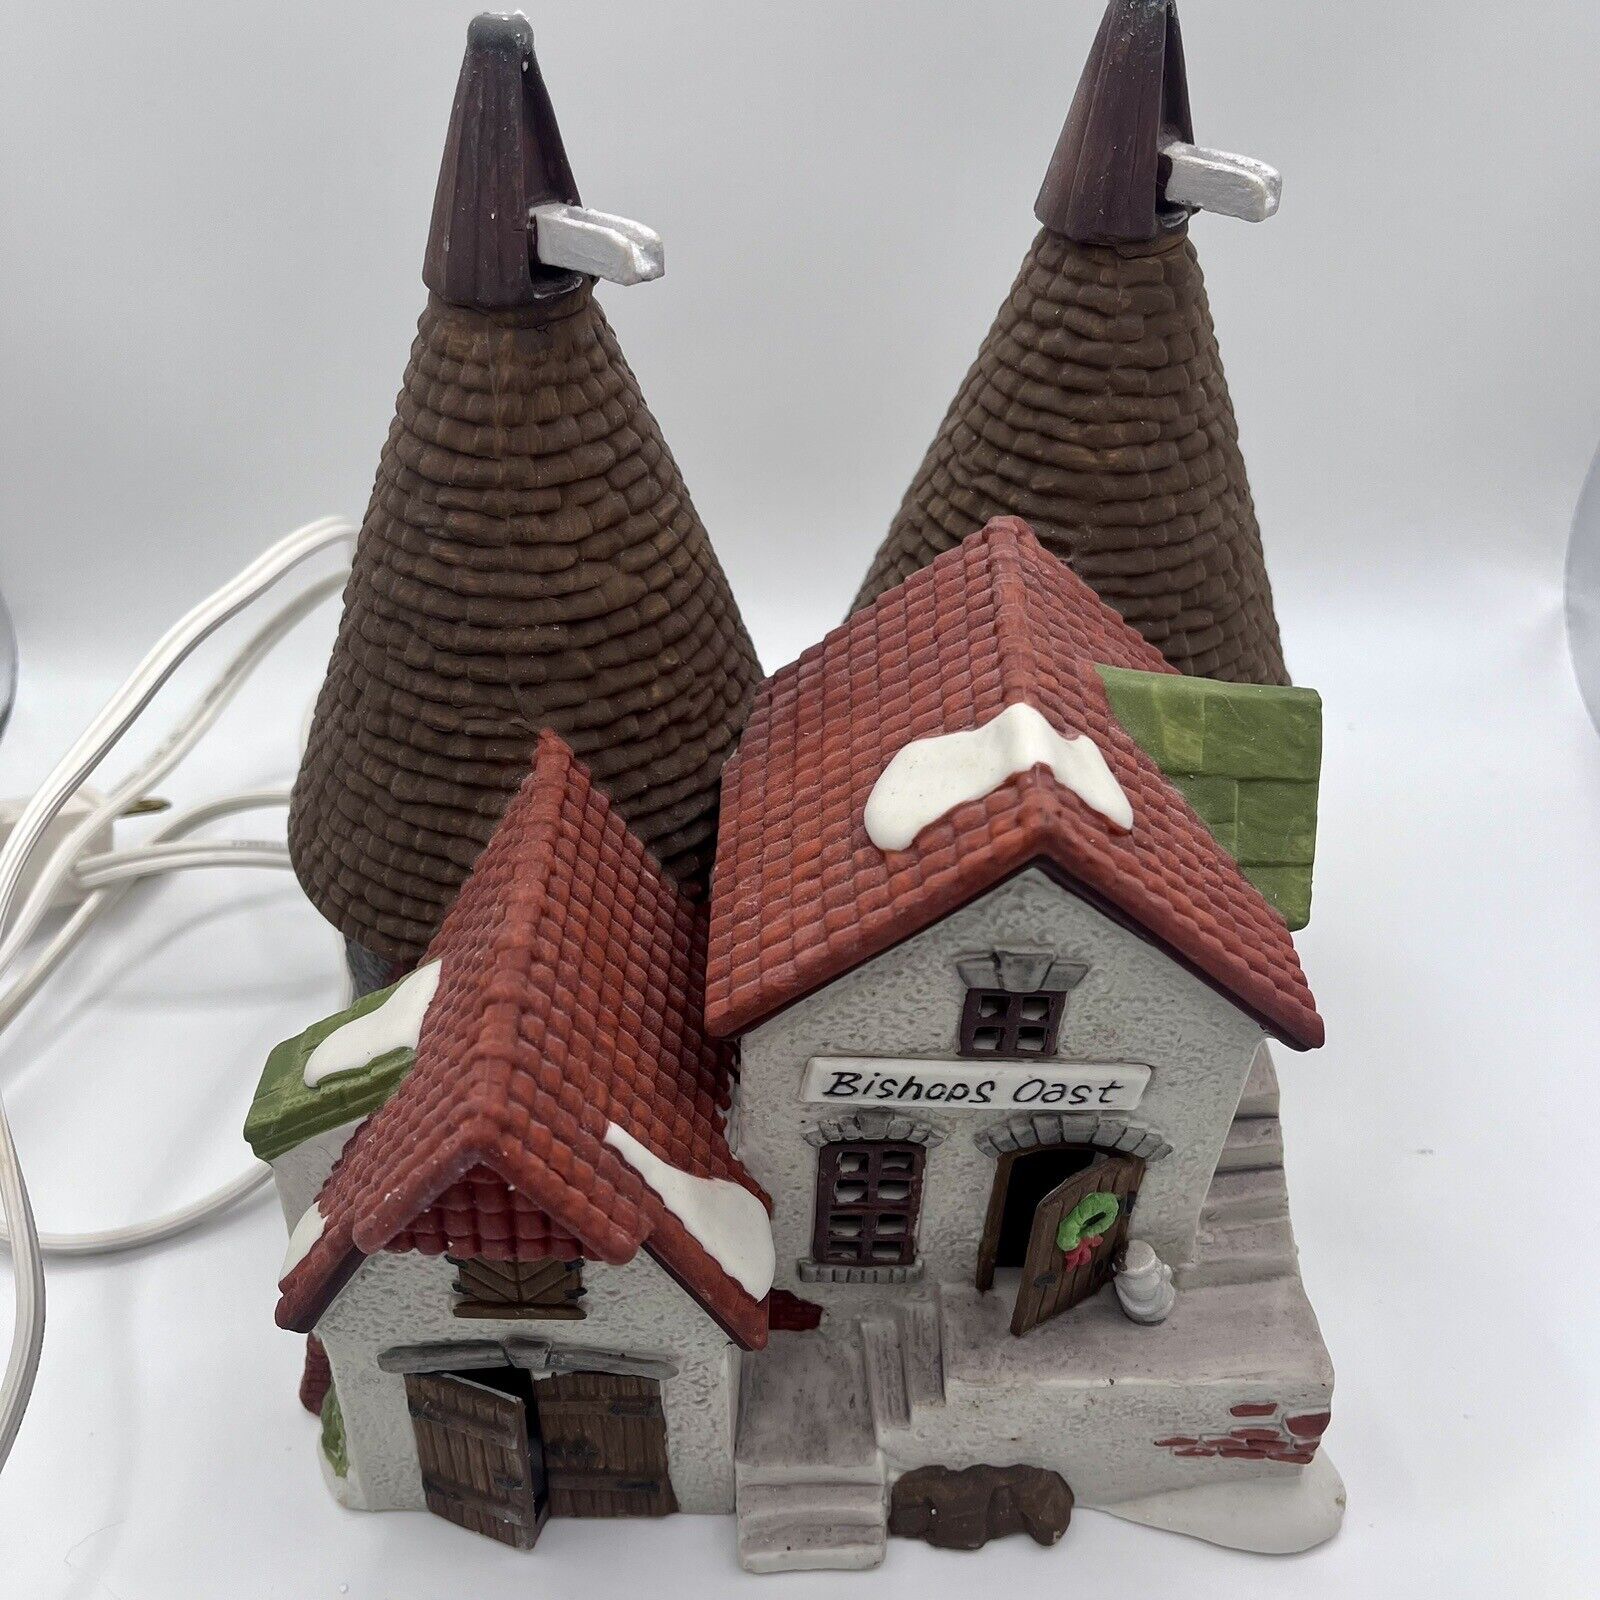 Department 56 Bishops Oast House #55670 Dickens Village Heritage Collection